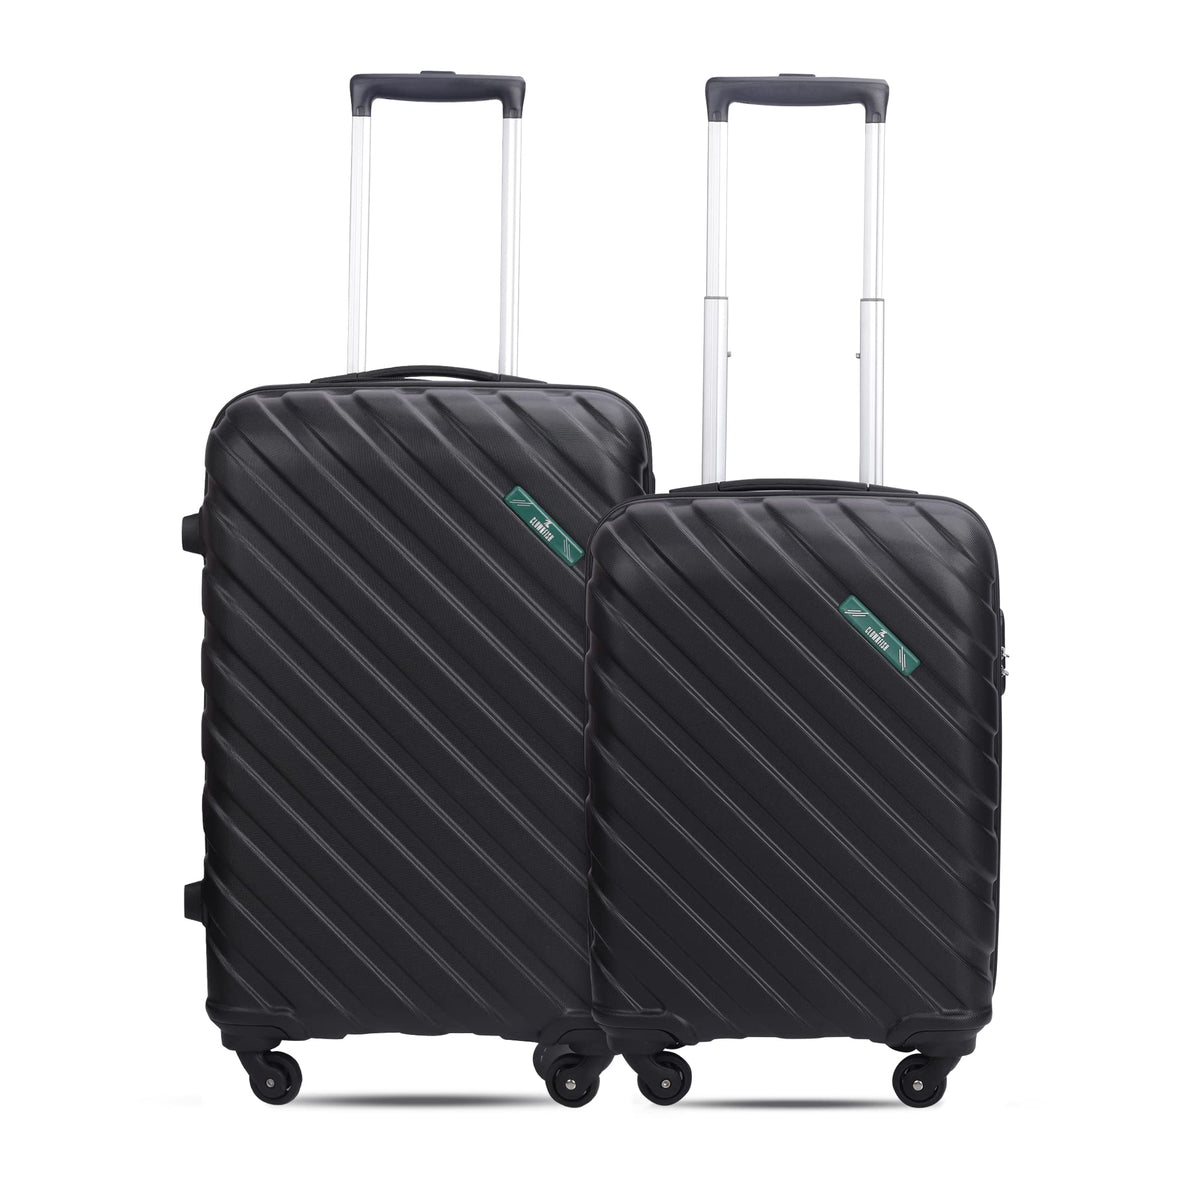 THE CLOWNFISH Armstrong Combo of 2 Luggage ABS Hard Case Suitcase Four Wheel Trolley Bags- Black (Medium-65 cm-24 inch, Small-54 cm-20 inch)